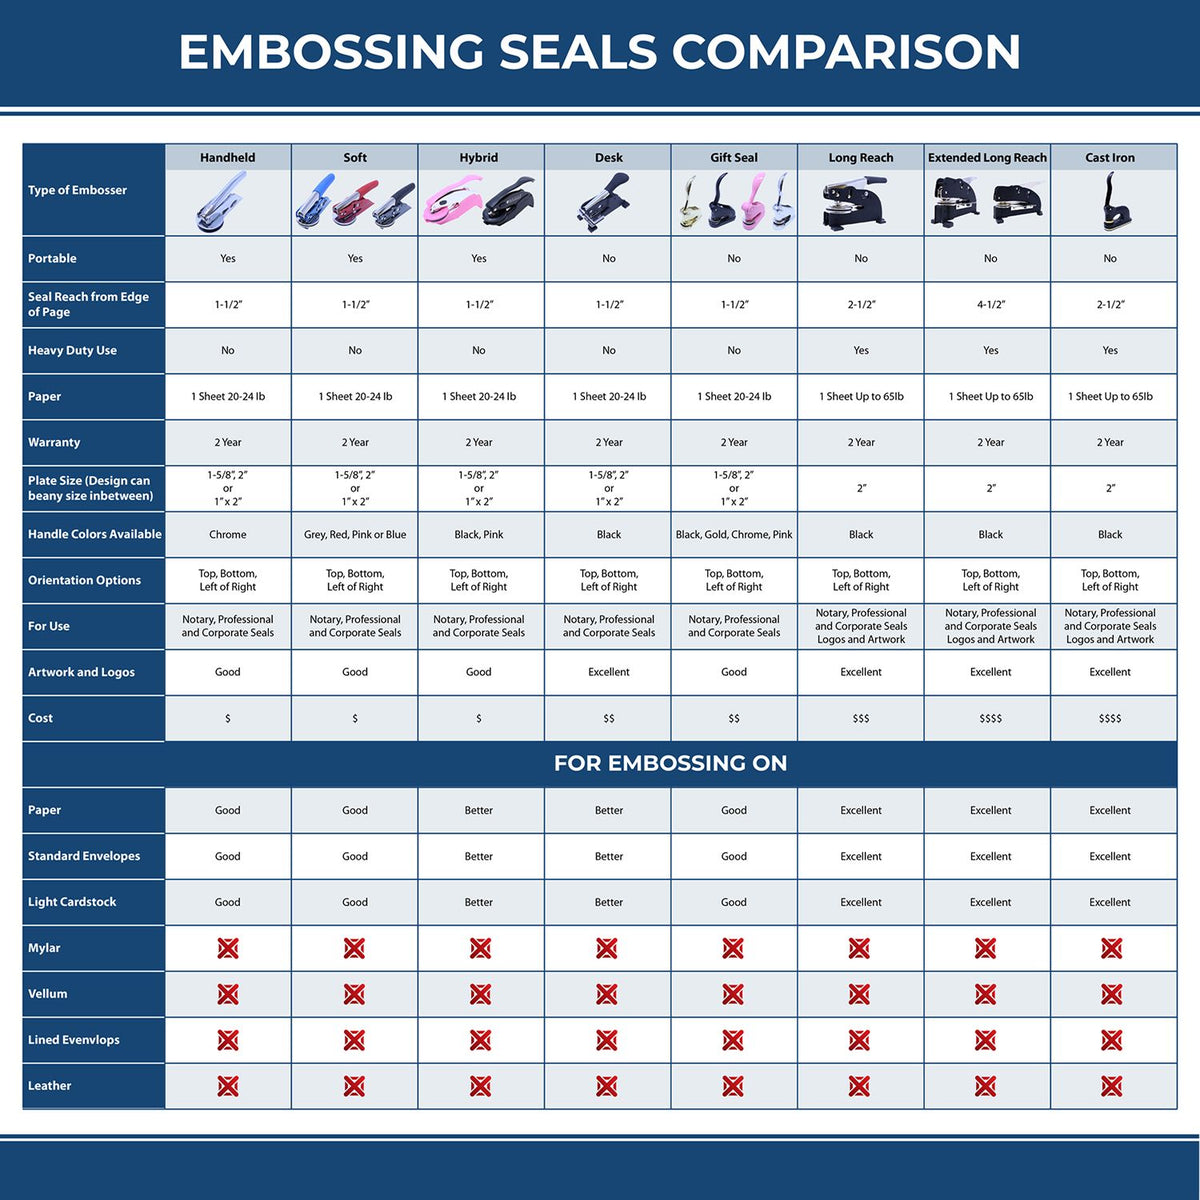 A comparison chart for the different types of mount models available for the Extended Long Reach Kansas Surveyor Embosser.